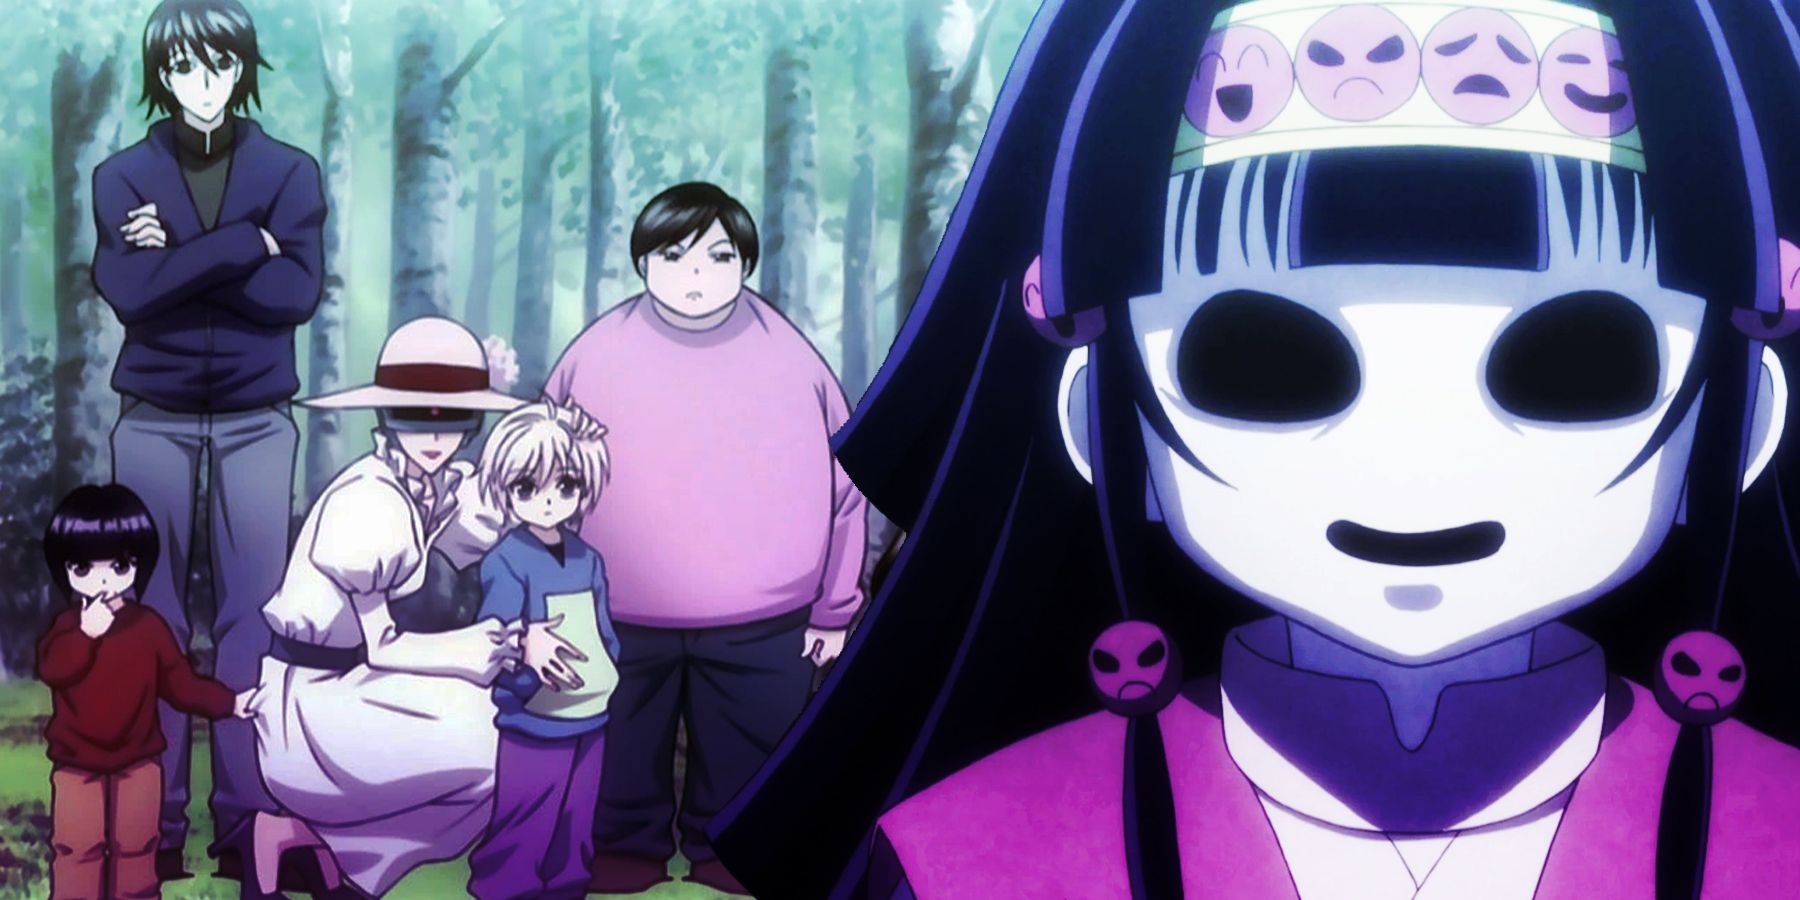 The Zoldyck family posing for a picture, and Alluka Zoldyck of anime Hunter X Hunter